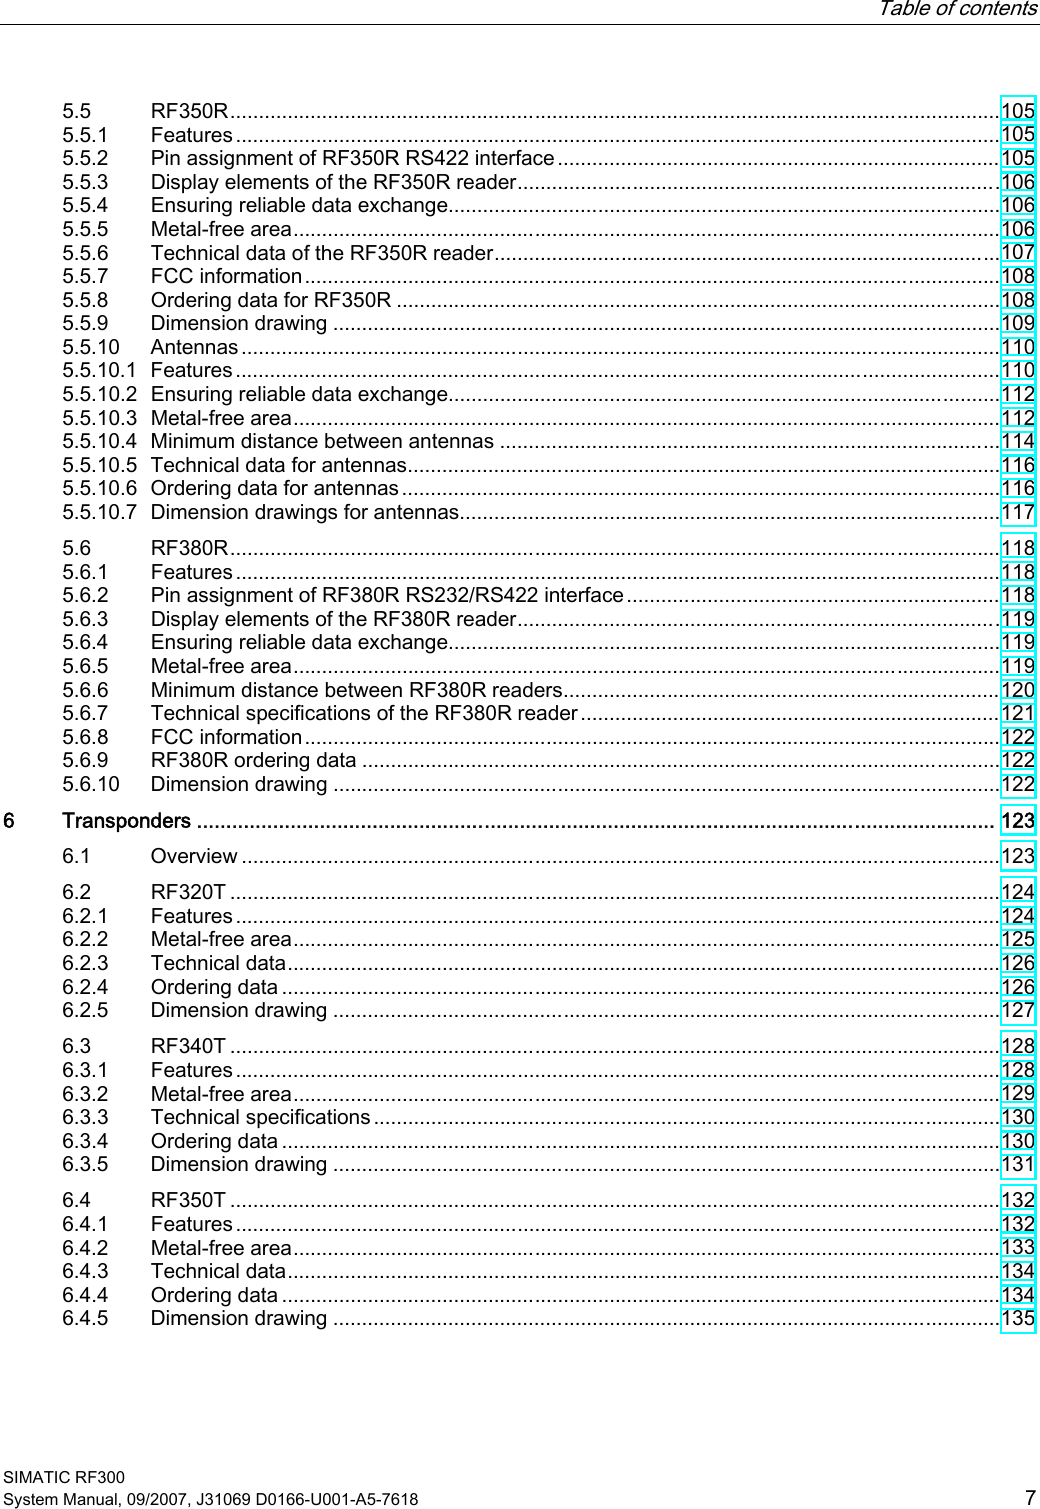   Table of contents   SIMATIC RF300 System Manual, 09/2007, J31069 D0166-U001-A5-7618  7 5.5  RF350R......................................................................................................................................105 5.5.1  Features.....................................................................................................................................105 5.5.2  Pin assignment of RF350R RS422 interface.............................................................................105 5.5.3  Display elements of the RF350R reader....................................................................................106 5.5.4  Ensuring reliable data exchange................................................................................................106 5.5.5  Metal-free area...........................................................................................................................106 5.5.6  Technical data of the RF350R reader........................................................................................107 5.5.7  FCC information.........................................................................................................................108 5.5.8  Ordering data for RF350R .........................................................................................................108 5.5.9  Dimension drawing ....................................................................................................................109 5.5.10  Antennas....................................................................................................................................110 5.5.10.1  Features.....................................................................................................................................110 5.5.10.2  Ensuring reliable data exchange................................................................................................112 5.5.10.3  Metal-free area...........................................................................................................................112 5.5.10.4  Minimum distance between antennas .......................................................................................114 5.5.10.5  Technical data for antennas.......................................................................................................116 5.5.10.6  Ordering data for antennas........................................................................................................116 5.5.10.7  Dimension drawings for antennas..............................................................................................117 5.6  RF380R......................................................................................................................................118 5.6.1  Features.....................................................................................................................................118 5.6.2  Pin assignment of RF380R RS232/RS422 interface.................................................................118 5.6.3  Display elements of the RF380R reader....................................................................................119 5.6.4  Ensuring reliable data exchange................................................................................................119 5.6.5  Metal-free area...........................................................................................................................119 5.6.6  Minimum distance between RF380R readers............................................................................120 5.6.7  Technical specifications of the RF380R reader.........................................................................121 5.6.8  FCC information.........................................................................................................................122 5.6.9  RF380R ordering data ...............................................................................................................122 5.6.10  Dimension drawing ....................................................................................................................122 6  Transponders ........................................................................................................................................ 123 6.1  Overview ....................................................................................................................................123 6.2  RF320T ......................................................................................................................................124 6.2.1  Features.....................................................................................................................................124 6.2.2  Metal-free area...........................................................................................................................125 6.2.3  Technical data............................................................................................................................126 6.2.4  Ordering data .............................................................................................................................126 6.2.5  Dimension drawing ....................................................................................................................127 6.3  RF340T ......................................................................................................................................128 6.3.1  Features.....................................................................................................................................128 6.3.2  Metal-free area...........................................................................................................................129 6.3.3  Technical specifications .............................................................................................................130 6.3.4  Ordering data .............................................................................................................................130 6.3.5  Dimension drawing ....................................................................................................................131 6.4  RF350T ......................................................................................................................................132 6.4.1  Features.....................................................................................................................................132 6.4.2  Metal-free area...........................................................................................................................133 6.4.3  Technical data............................................................................................................................134 6.4.4  Ordering data .............................................................................................................................134 6.4.5  Dimension drawing ....................................................................................................................135 